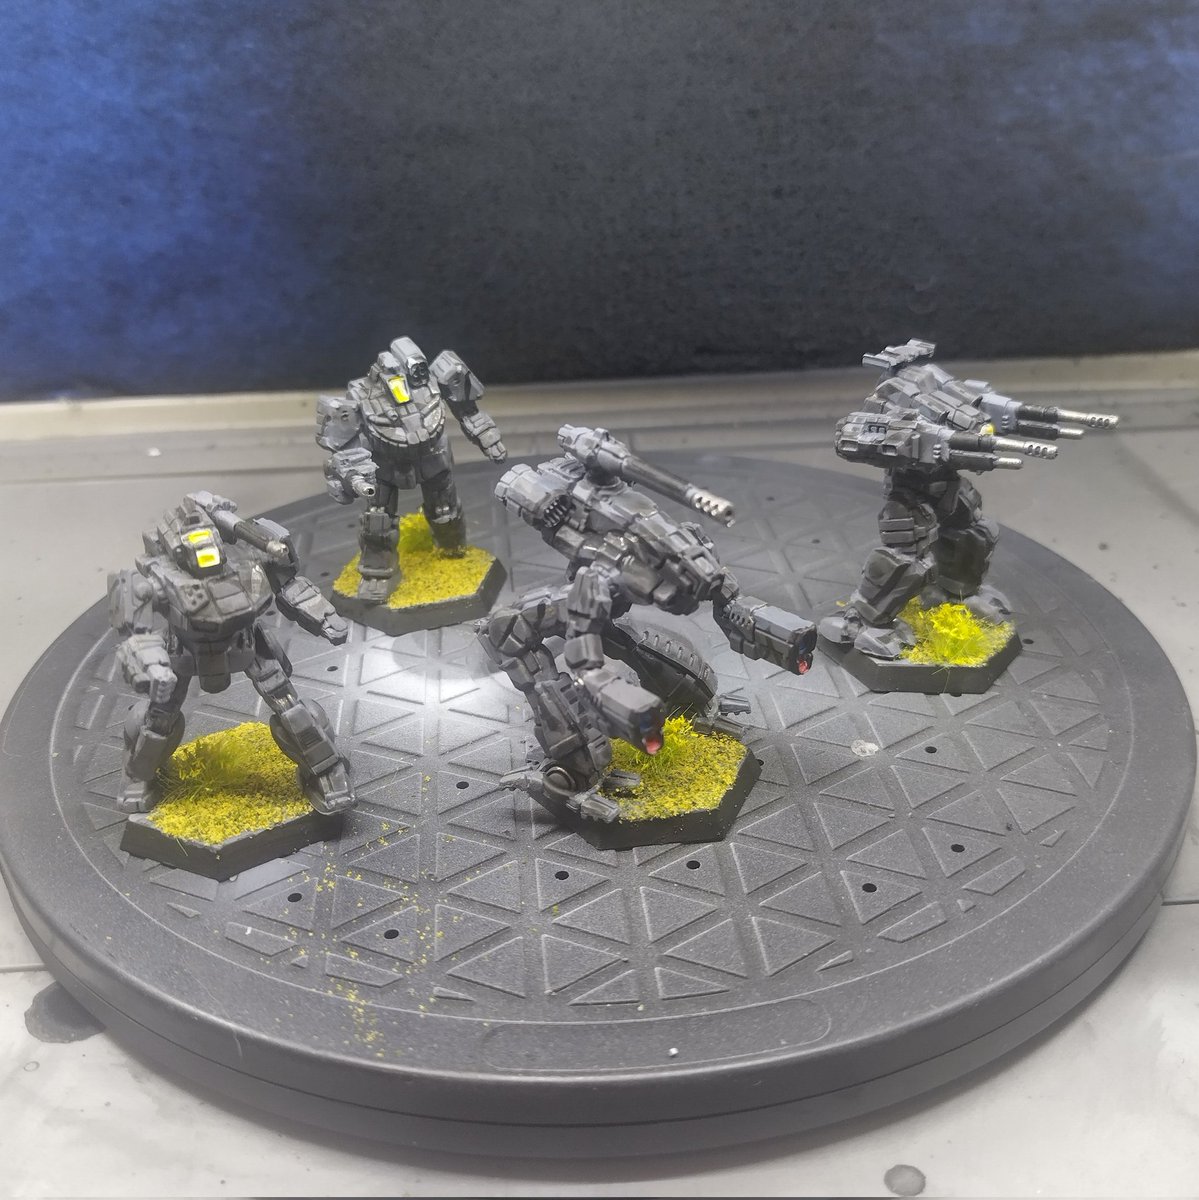 Who will stand against the tyranny of the dragon? The Gray Death Legion
#battletech #battletechminiatures #graydeathlegion #catalystgamelabs #citadelcontrast #armypainter #miniaturepainting #warmongers